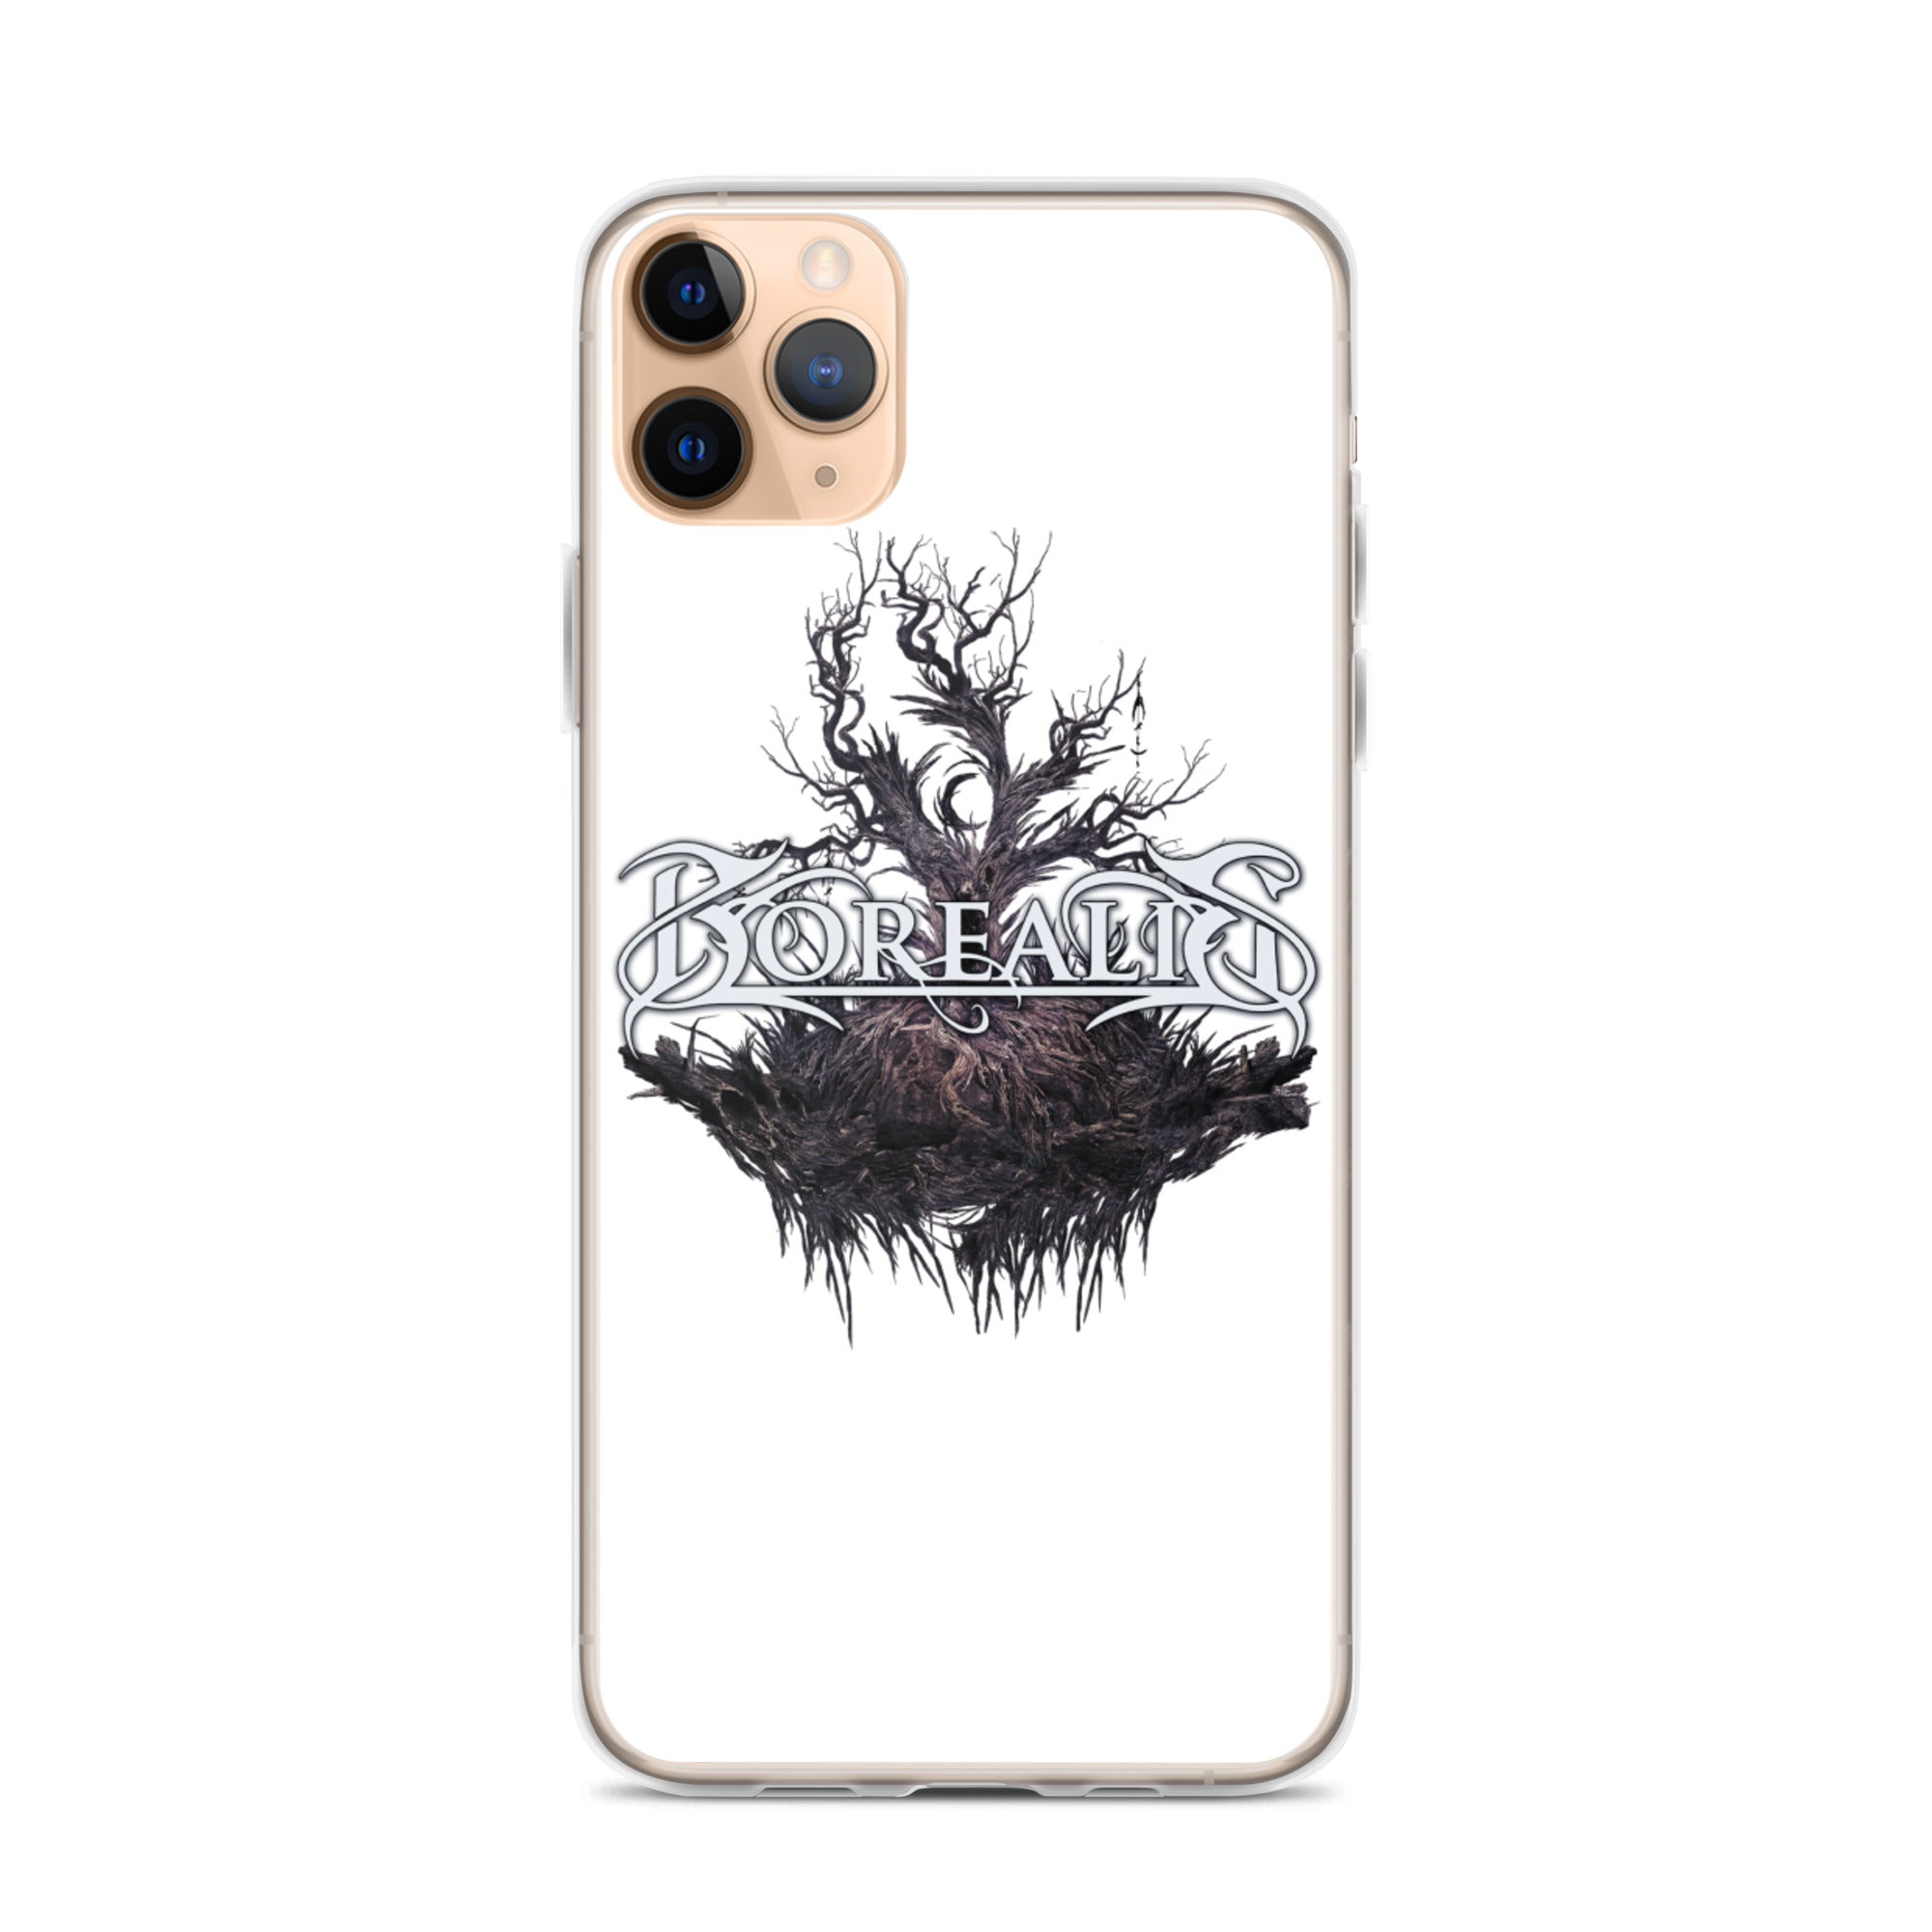 Phone Case - iPhone - The Offering Dead Tree